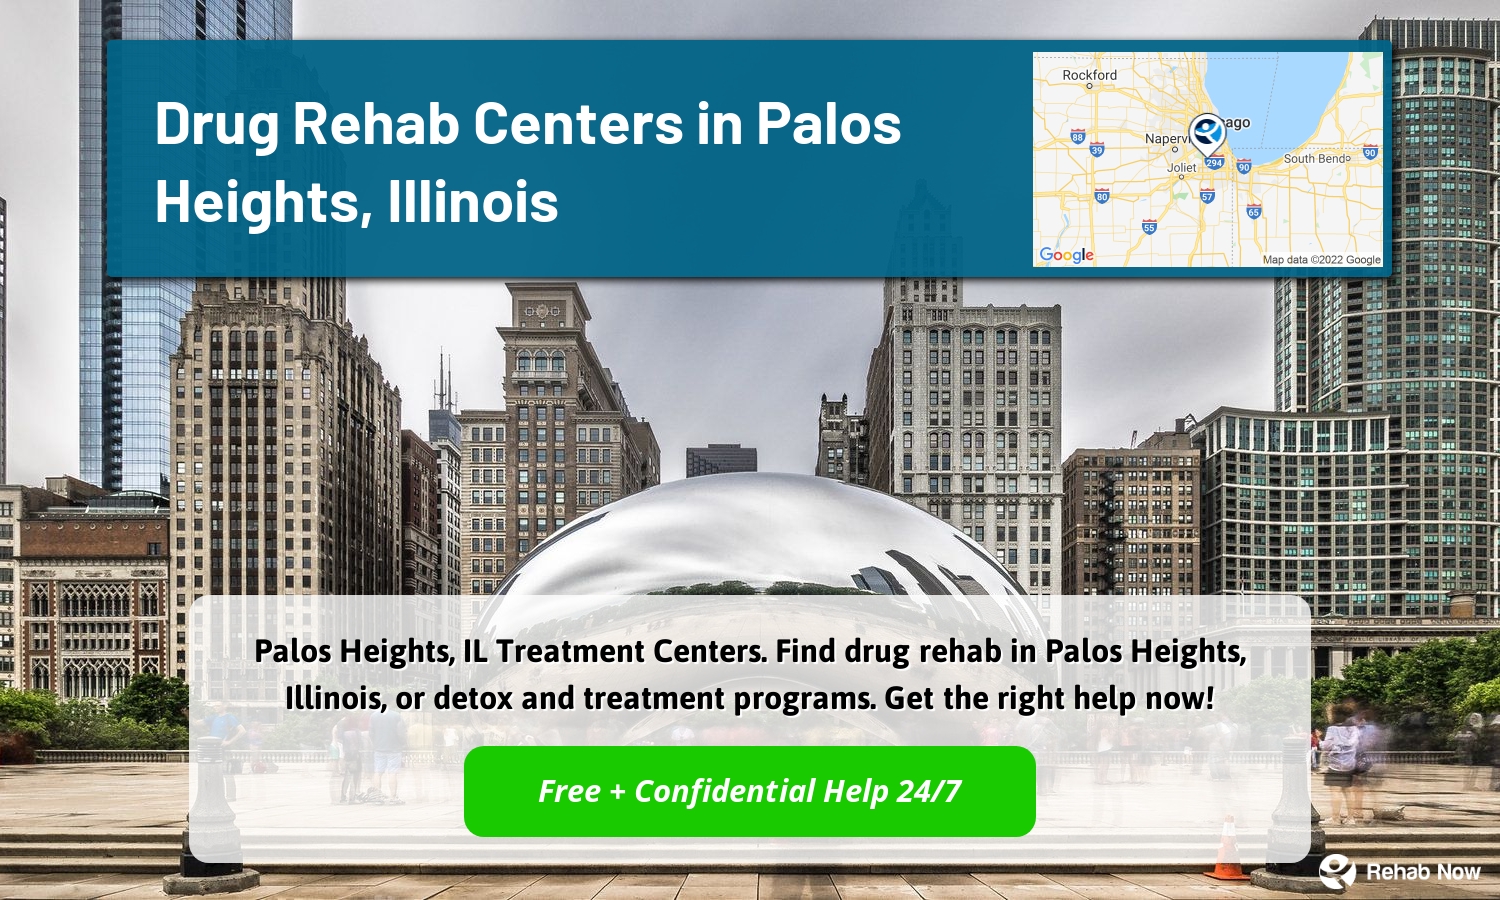 Palos Heights, IL Treatment Centers. Find drug rehab in Palos Heights, Illinois, or detox and treatment programs. Get the right help now!